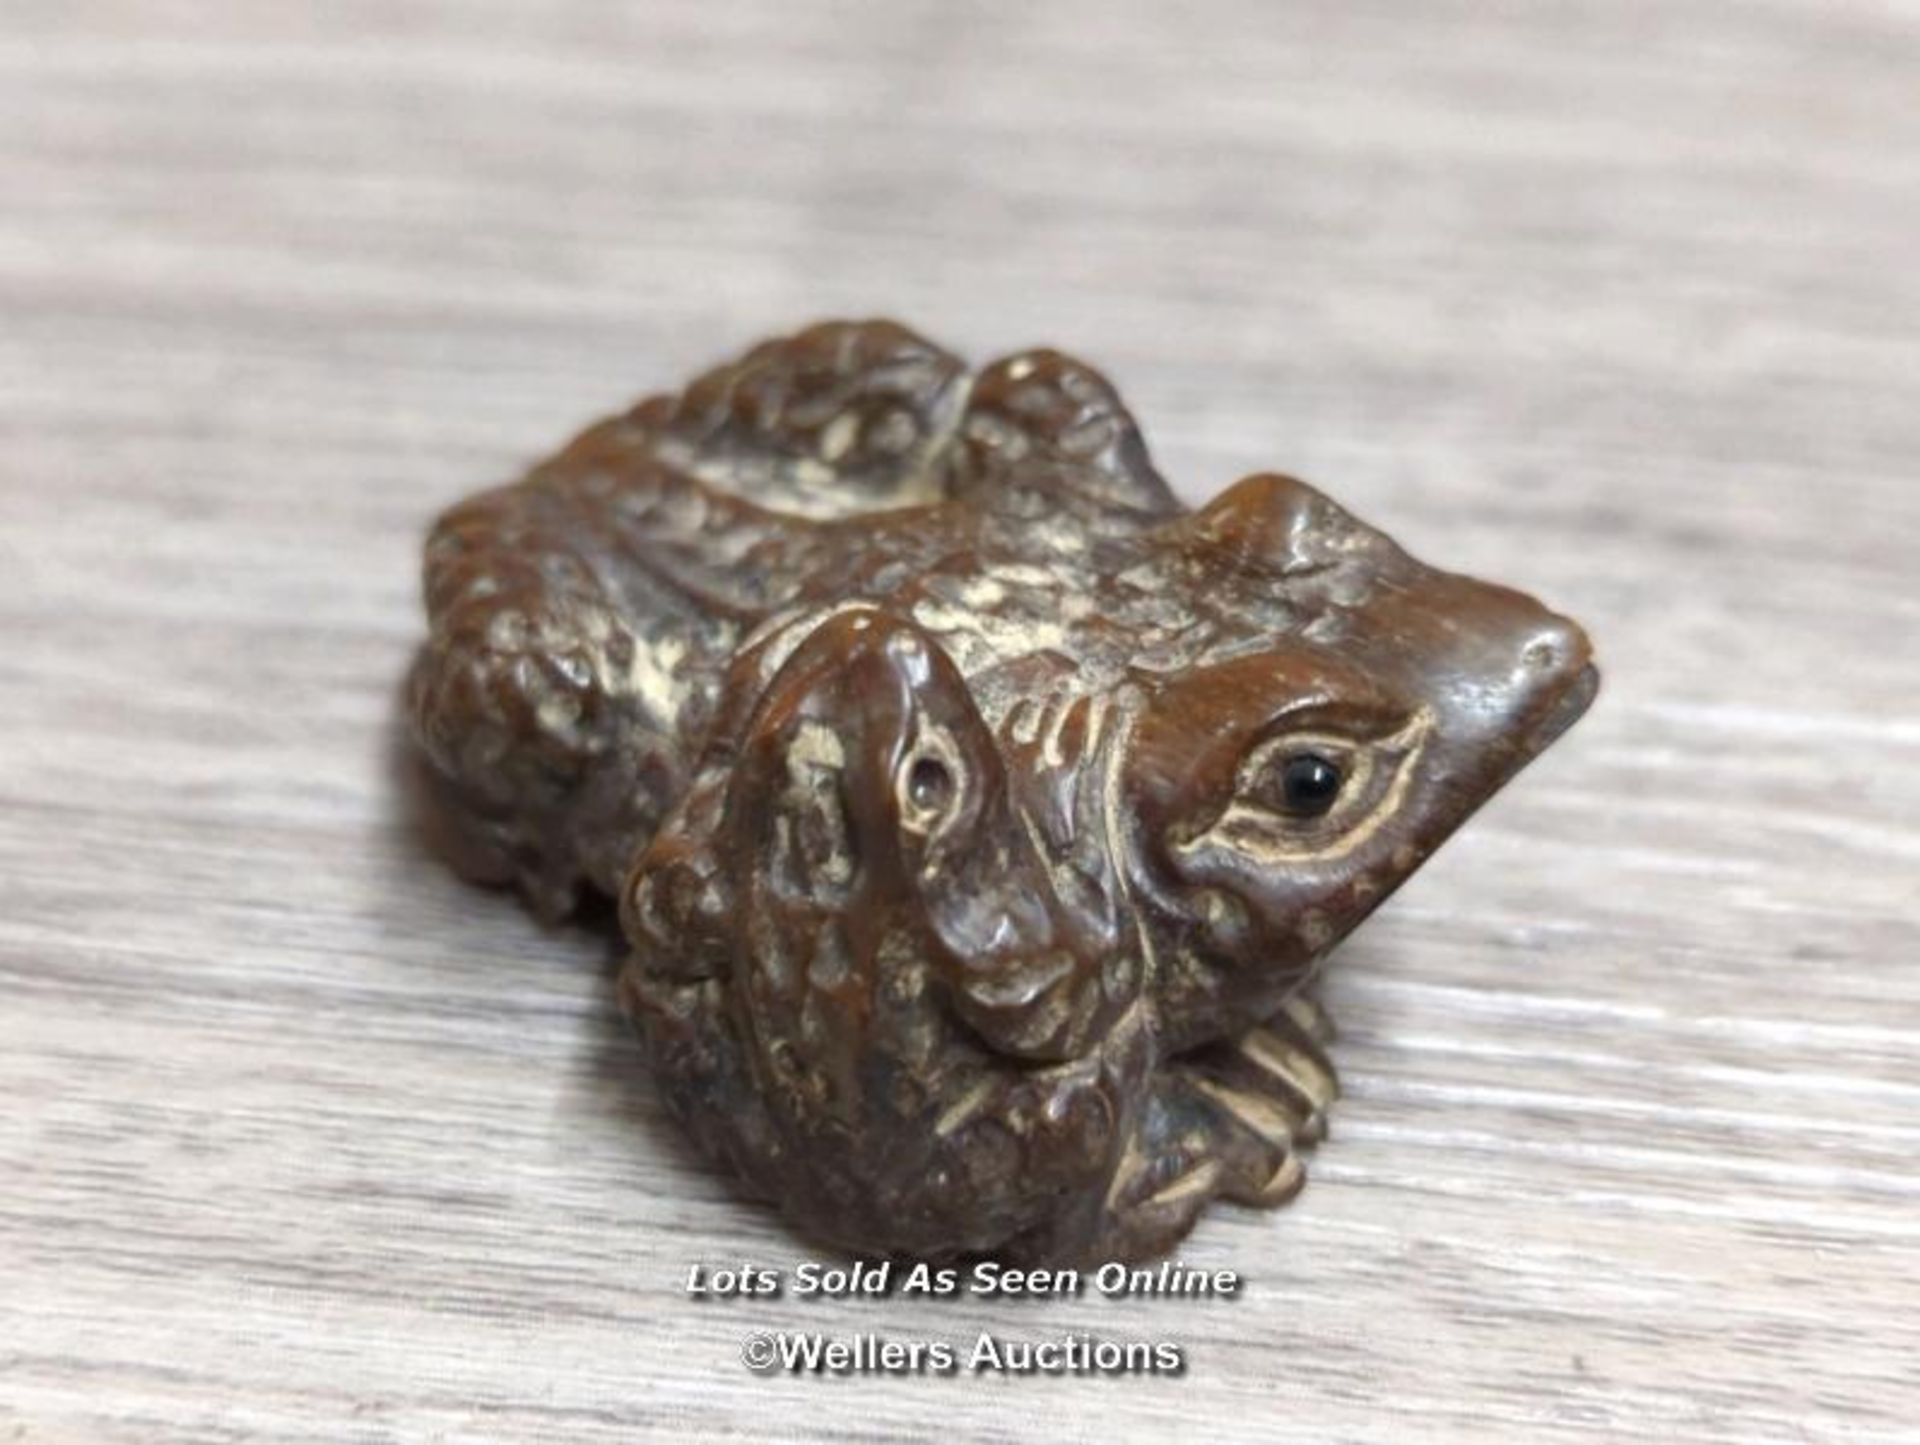 JAPANESE CARVED NETSUKE OF A TOAD FAMILY, MAKERS MARK ON THE BASE - Image 2 of 4